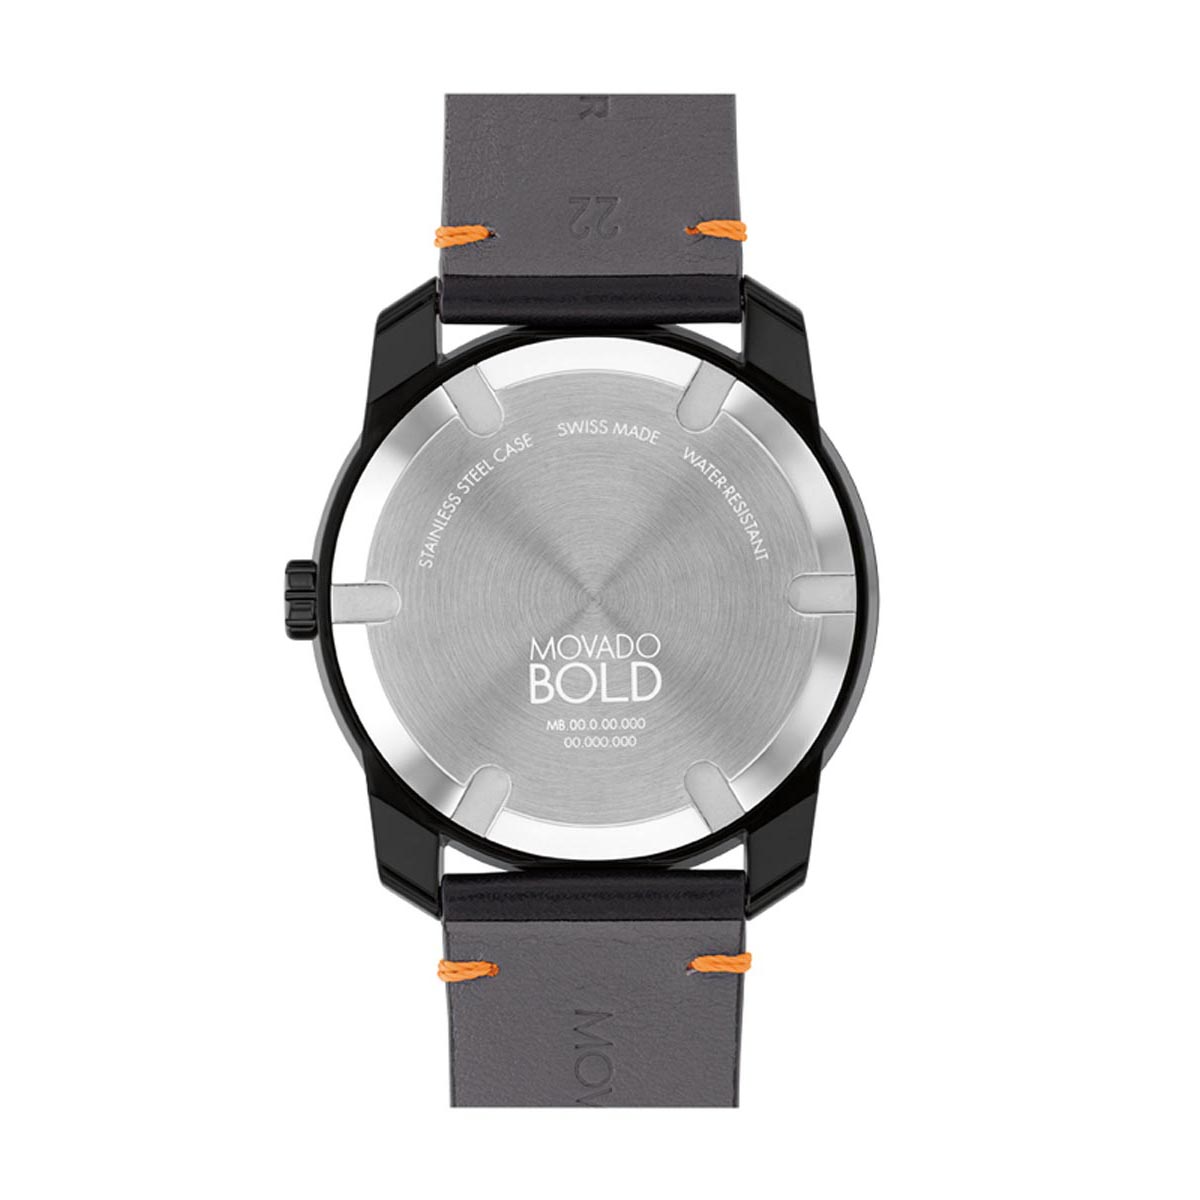 Movado Bold TR90 Mens Watch with Black and Orange Dial and Black Leather Strap (Swiss quartz movement)